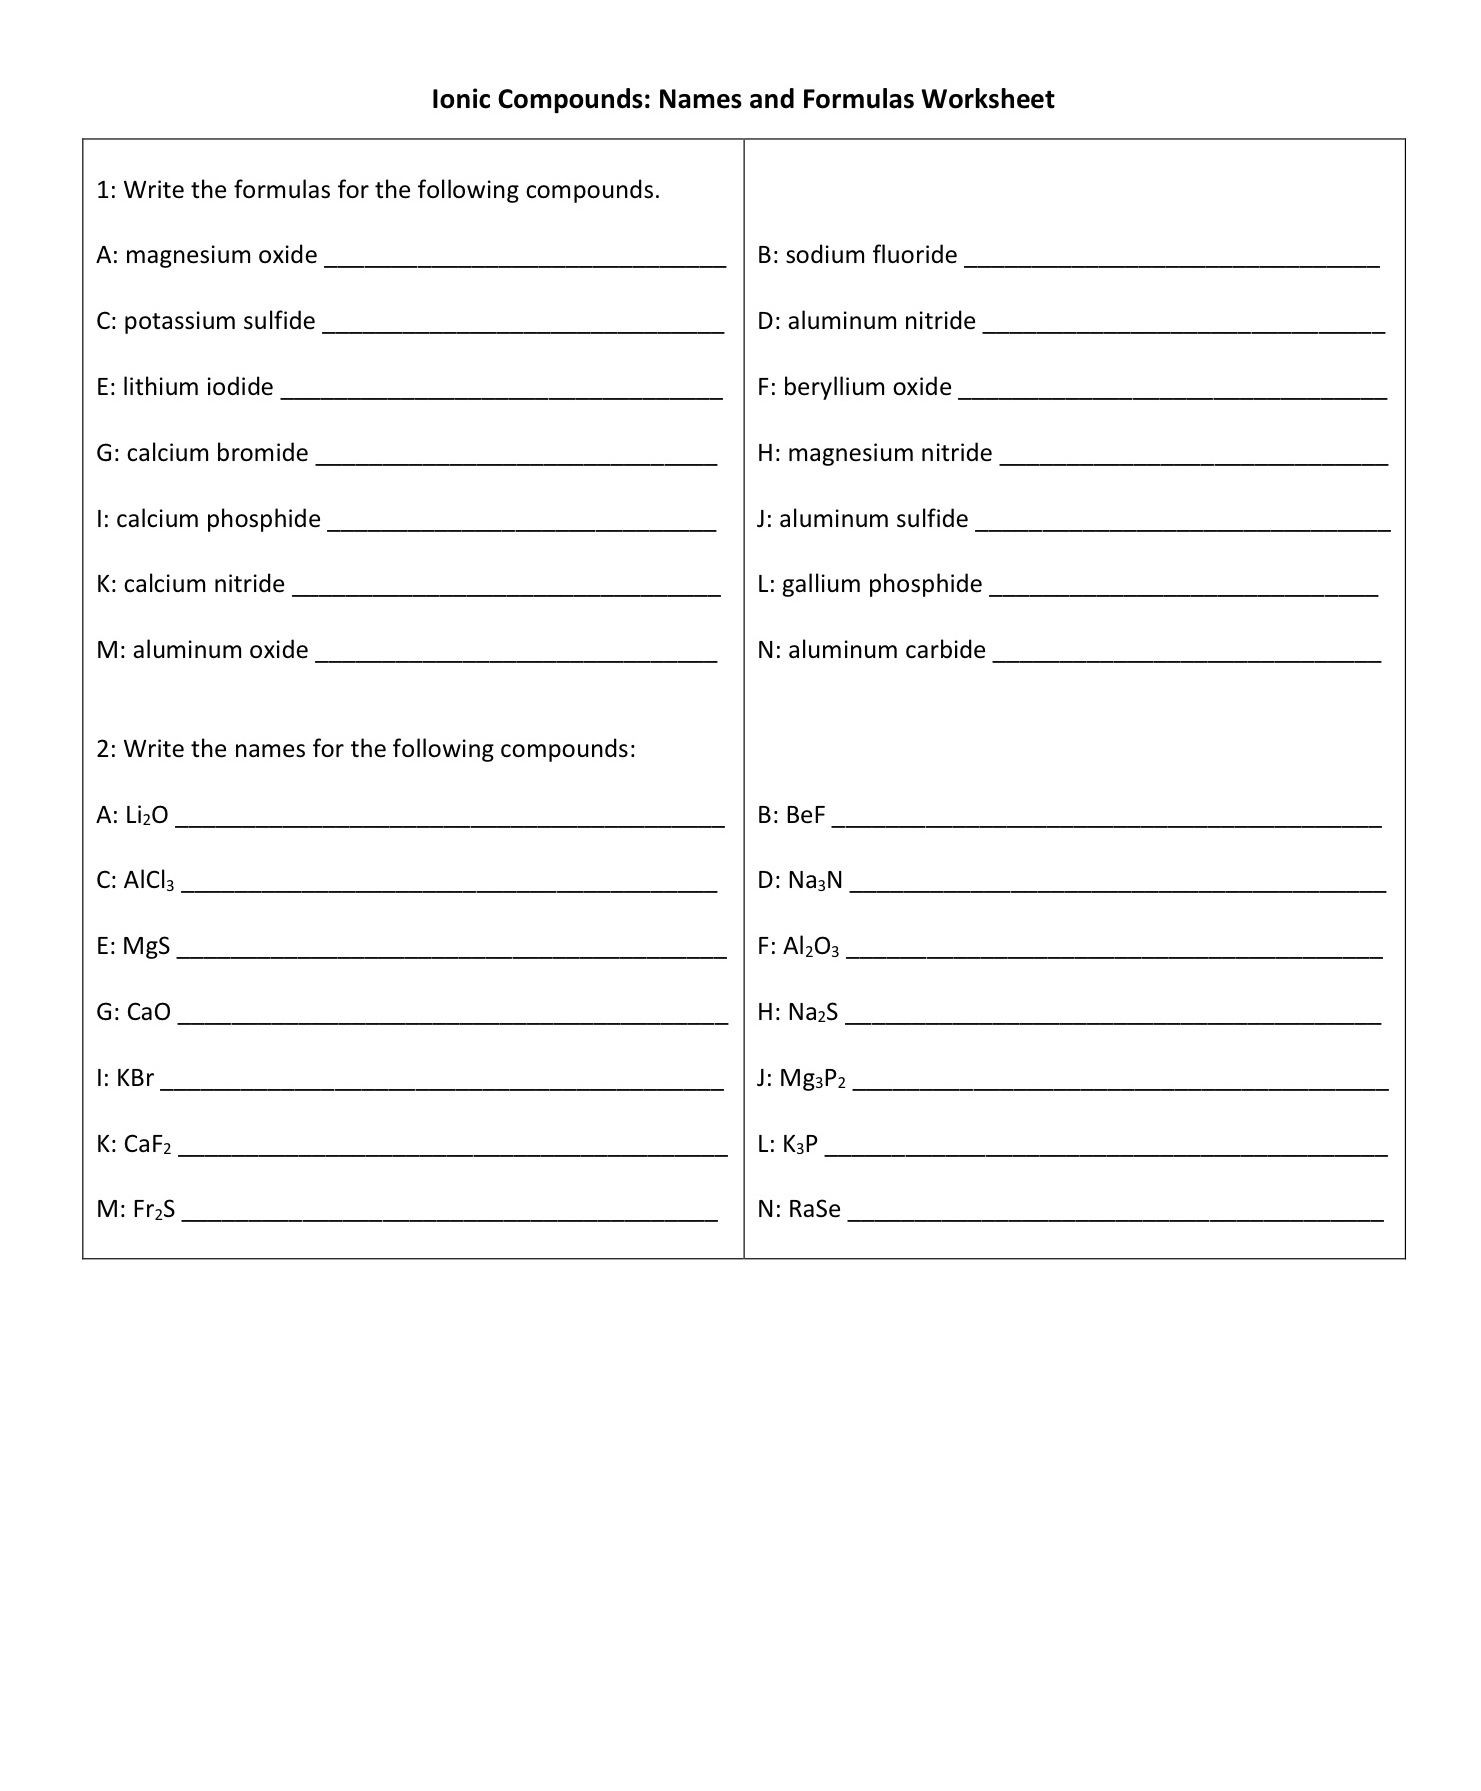 Counting atoms Worksheet Answers Snc1d Classification Matter Worksheet